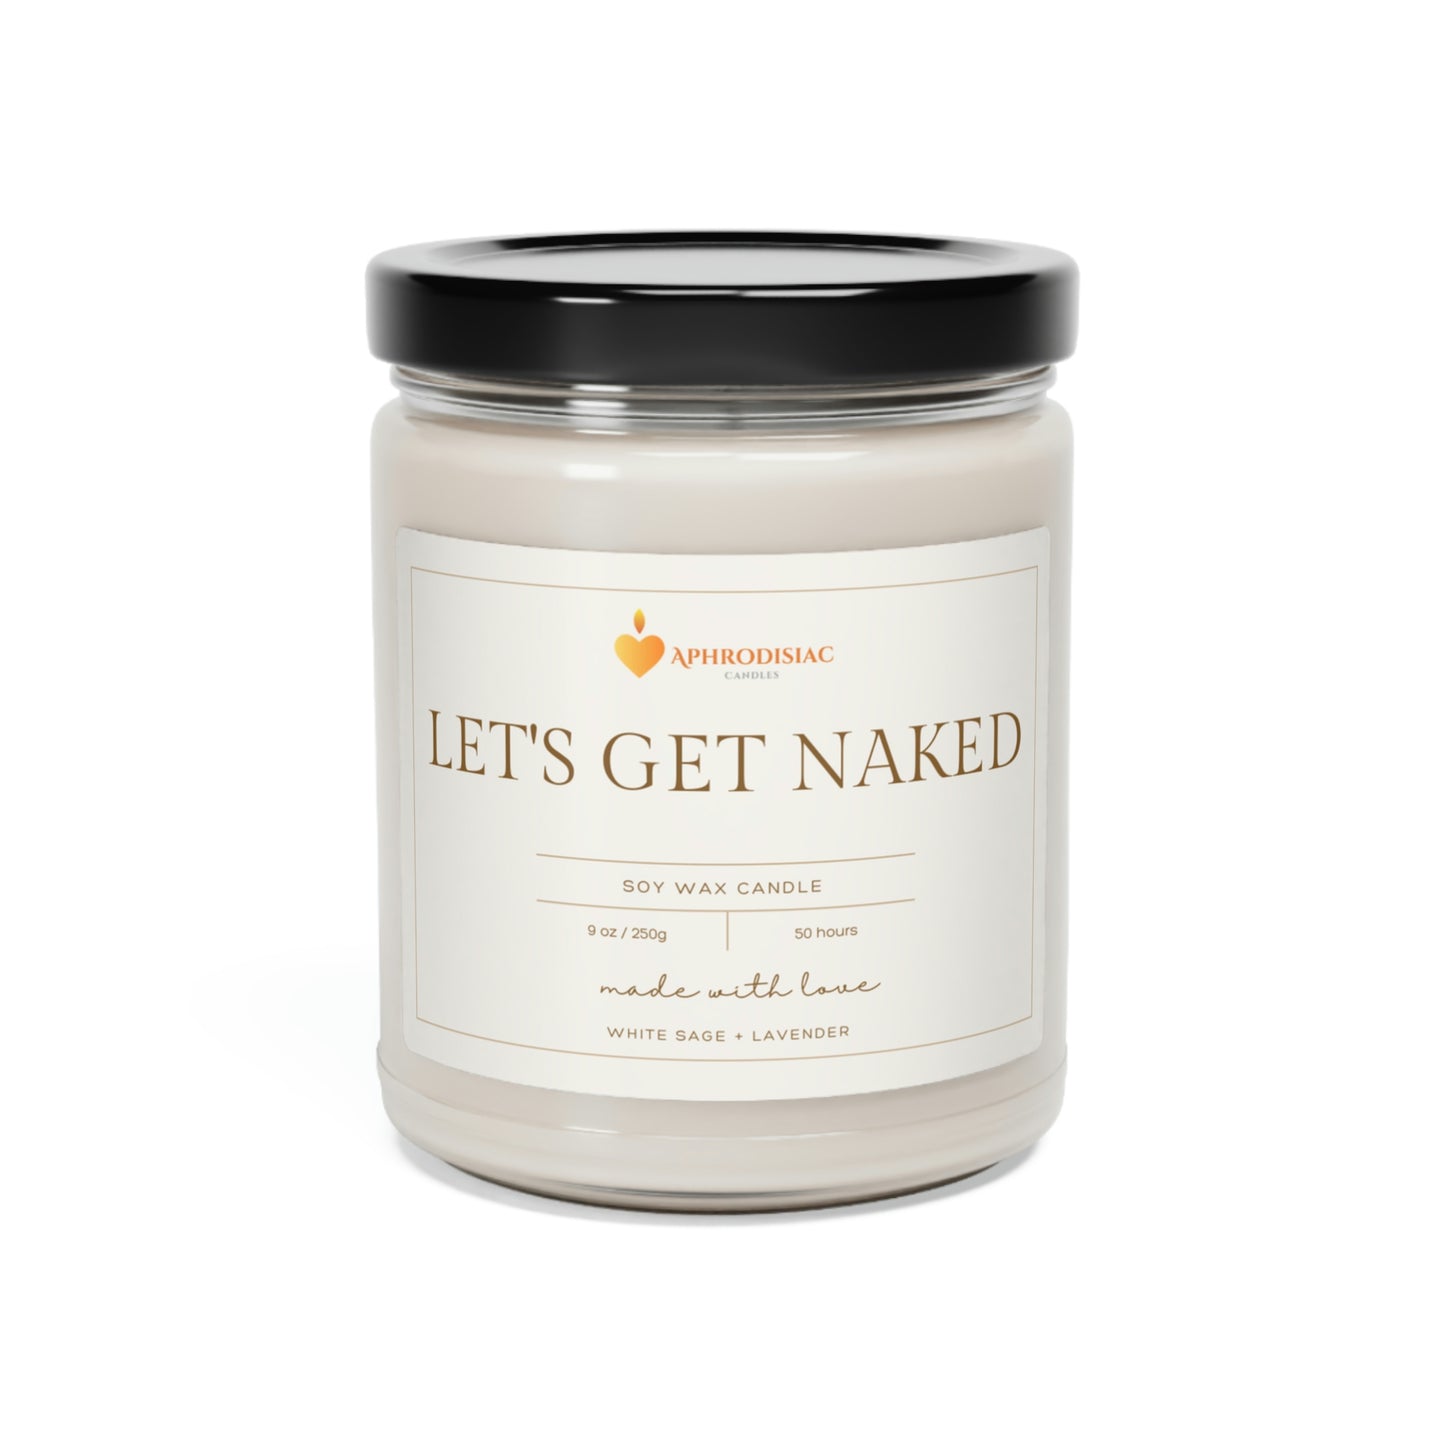 Let's Get Naked Aphrodisiac Soy Candle, 9oz